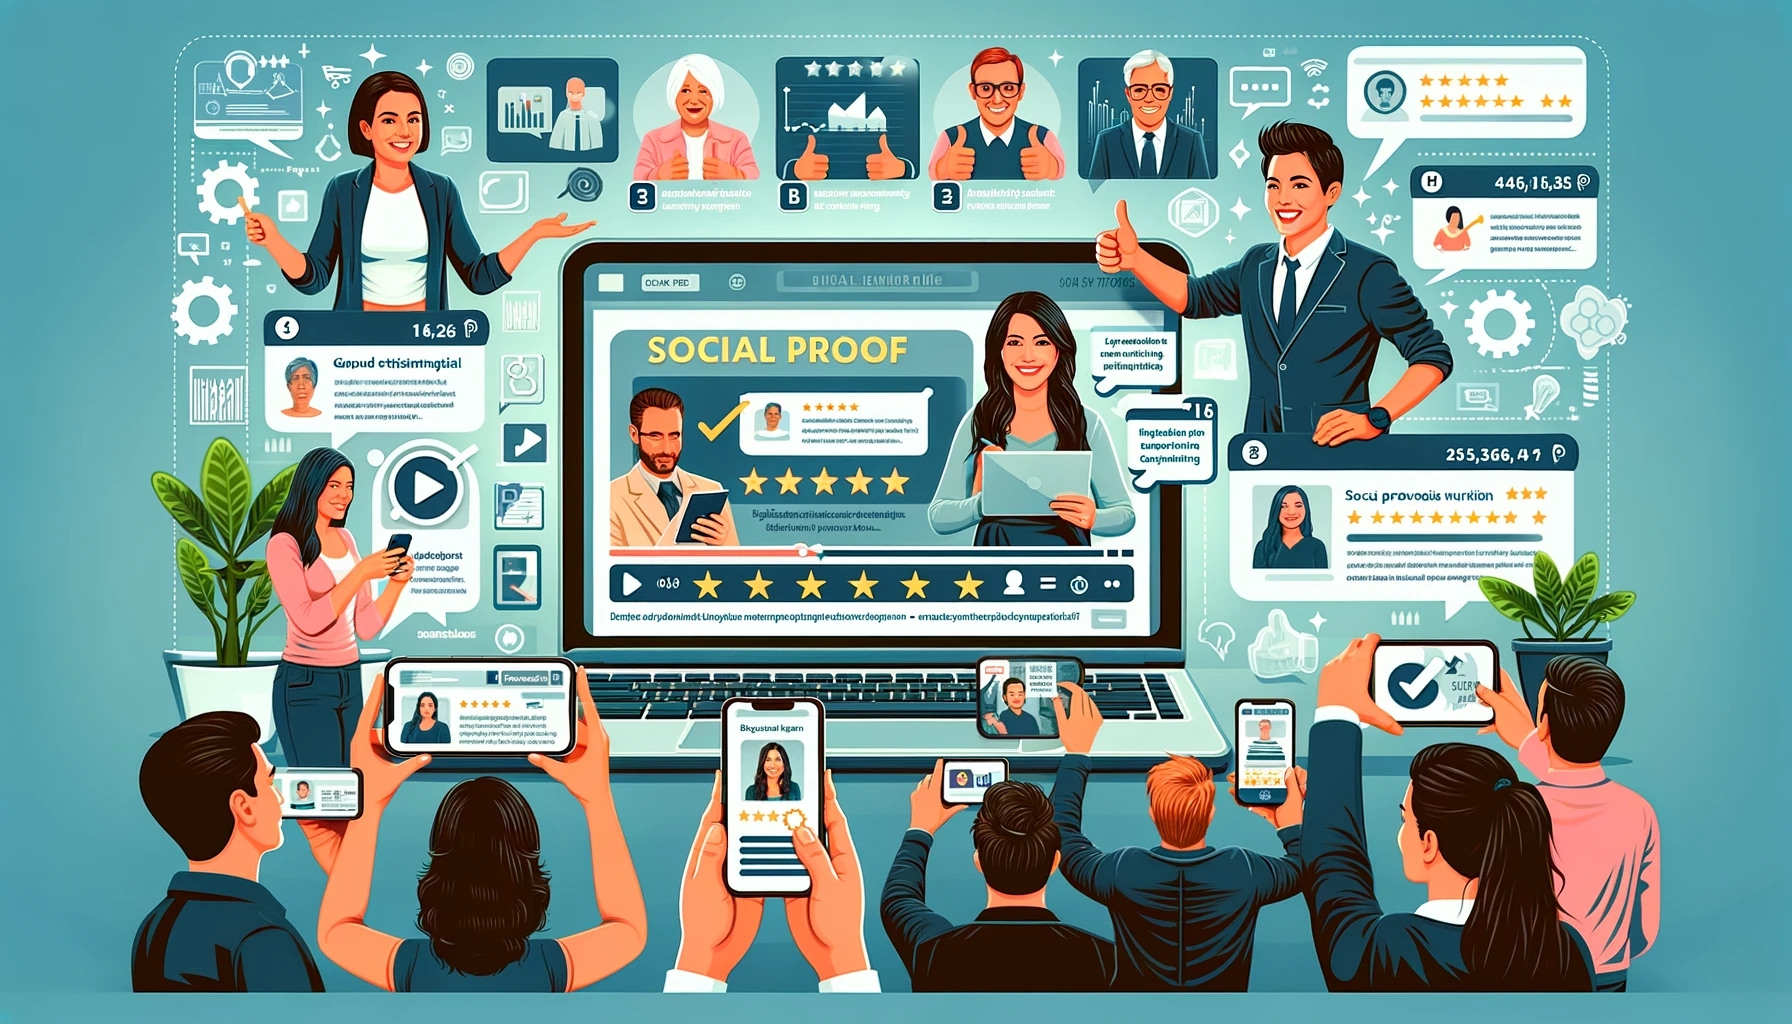 An informative wide image showcasing six types of social proof in business marketing: 1) A customer providing a video testimonial on a laptop, 2) People checking online reviews on smartphones, 3) An industry expert endorsing with a thumbs up, 4) A celebrity endorsing a product, 5) Users creating social media posts with a product, 6) An infographic of a case study. Each section is designed to enhance credibility and trust-building in social proof marketing strategies.